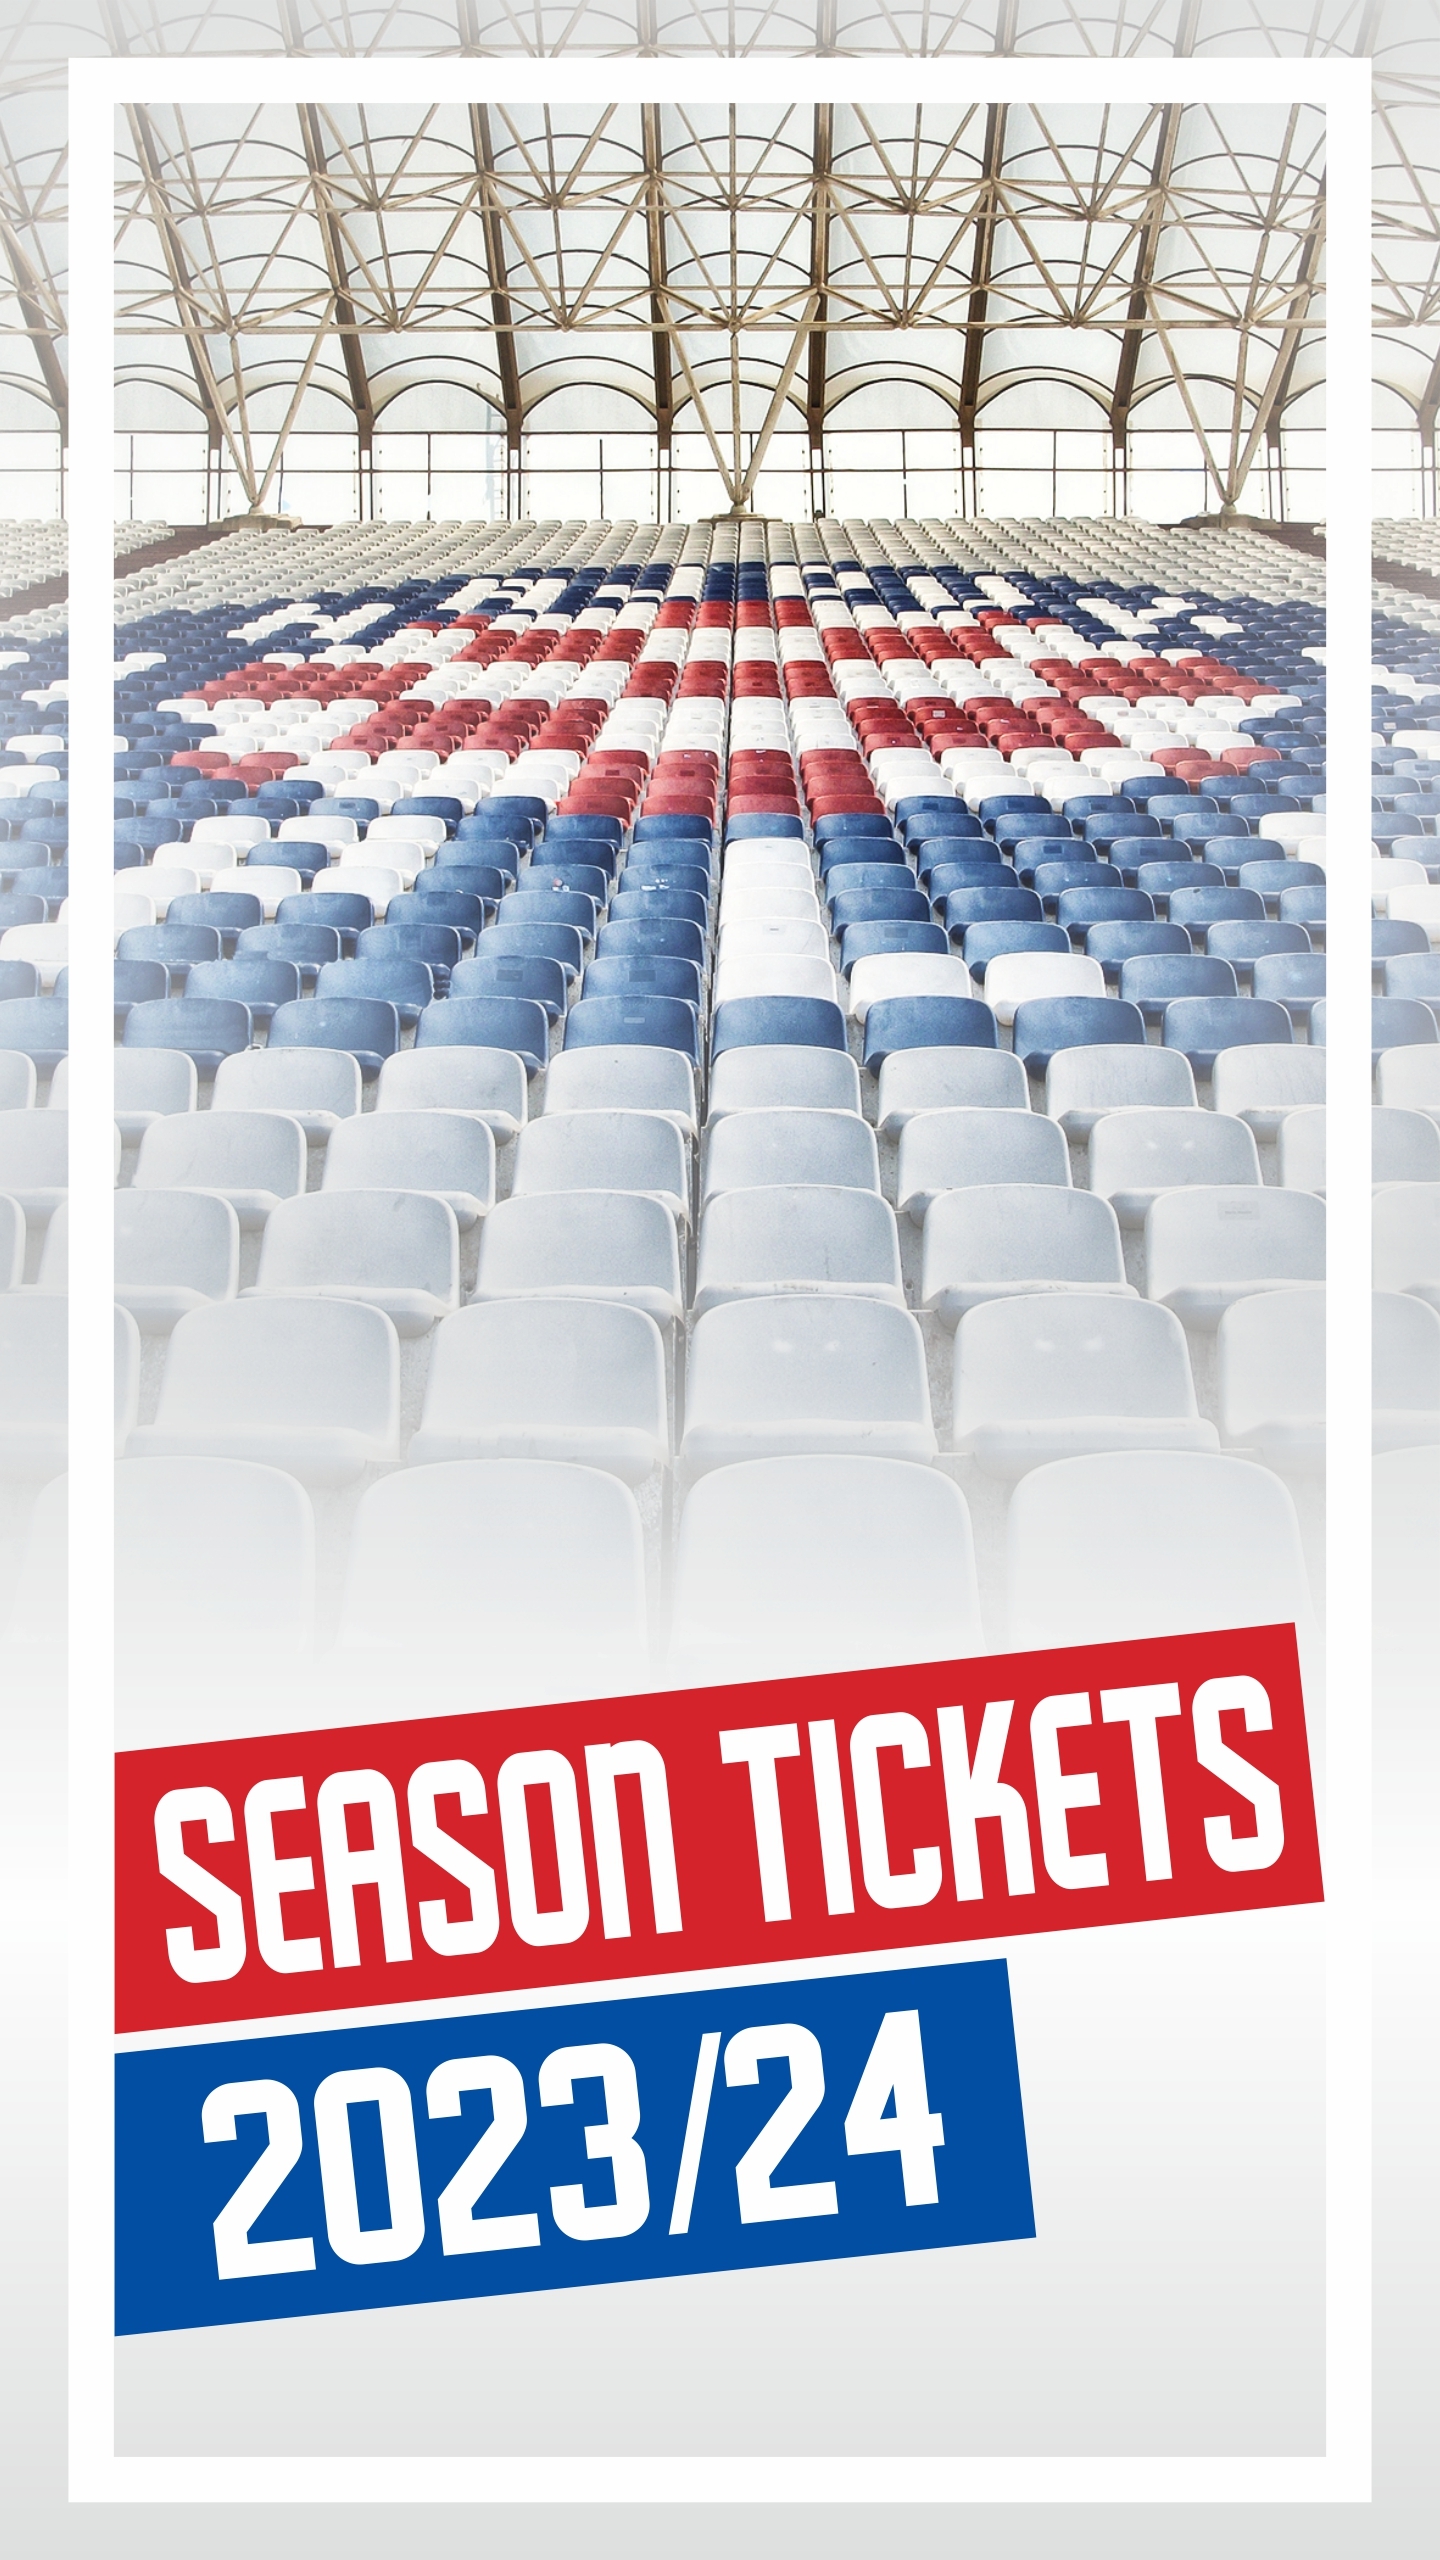 New season tickets now available: benefits for members, gifts, news •  HNK Hajduk Split